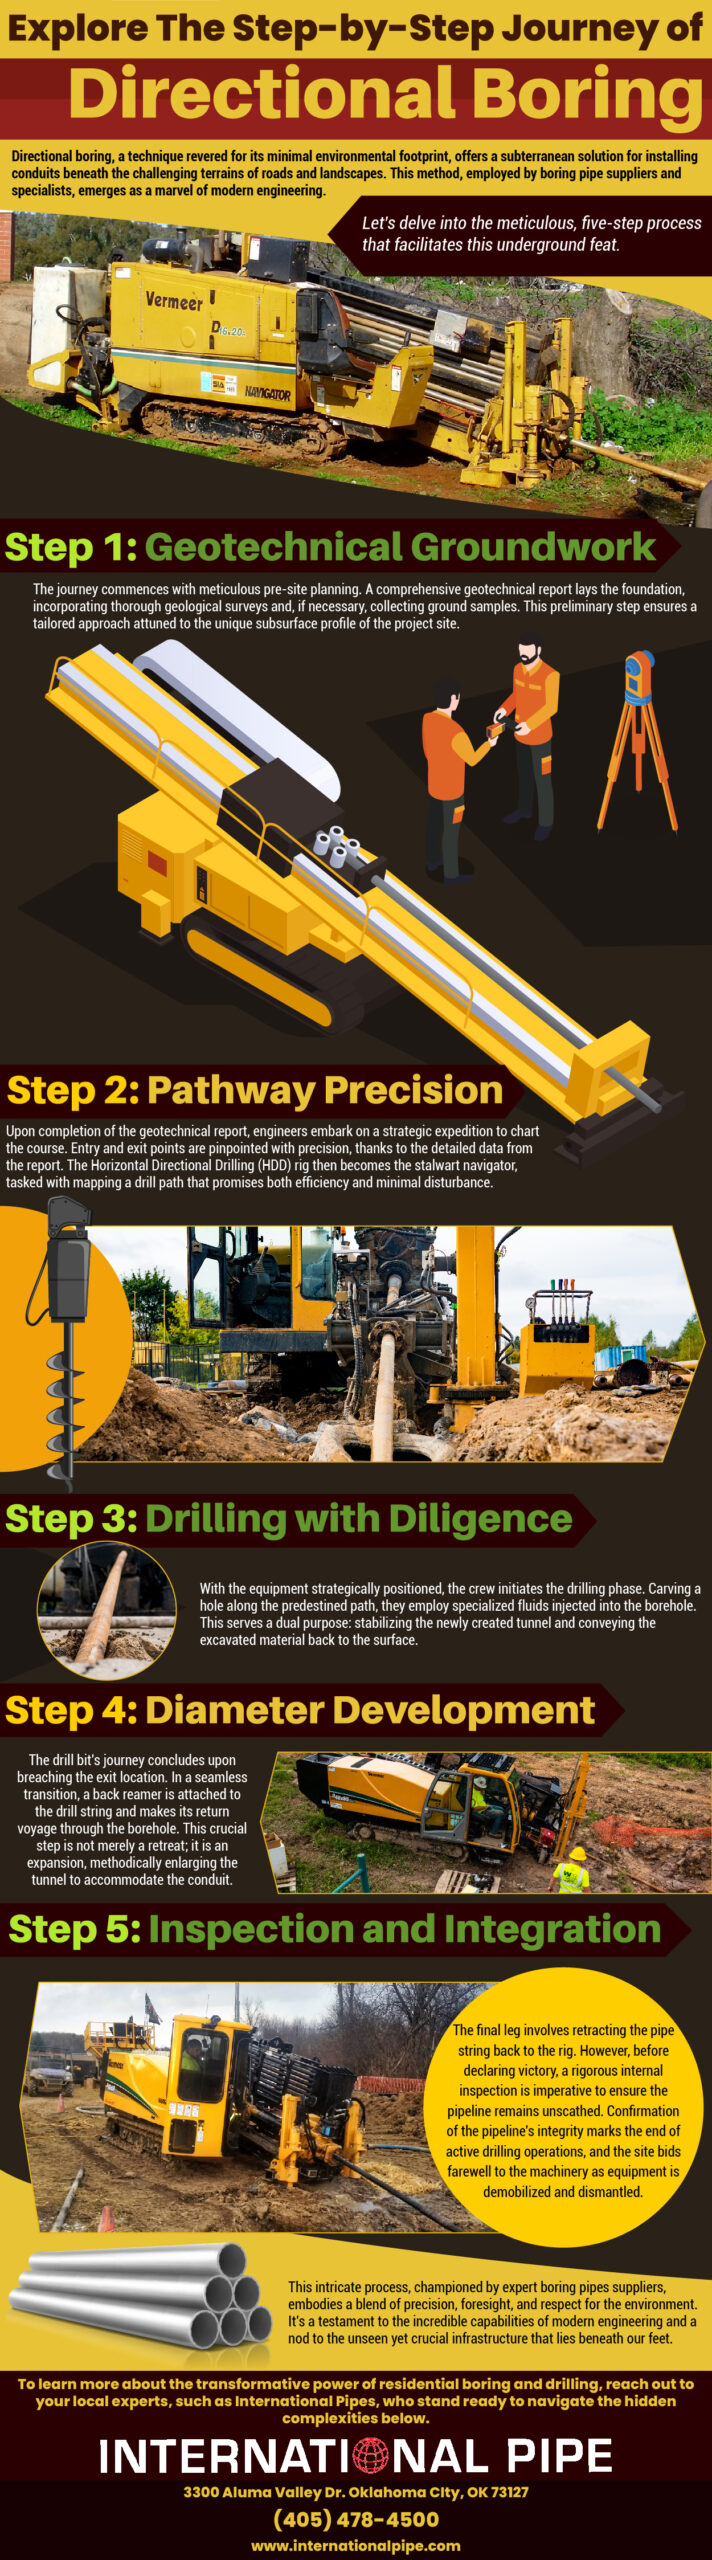 Explore The Step By Step Journey of Directional Boring